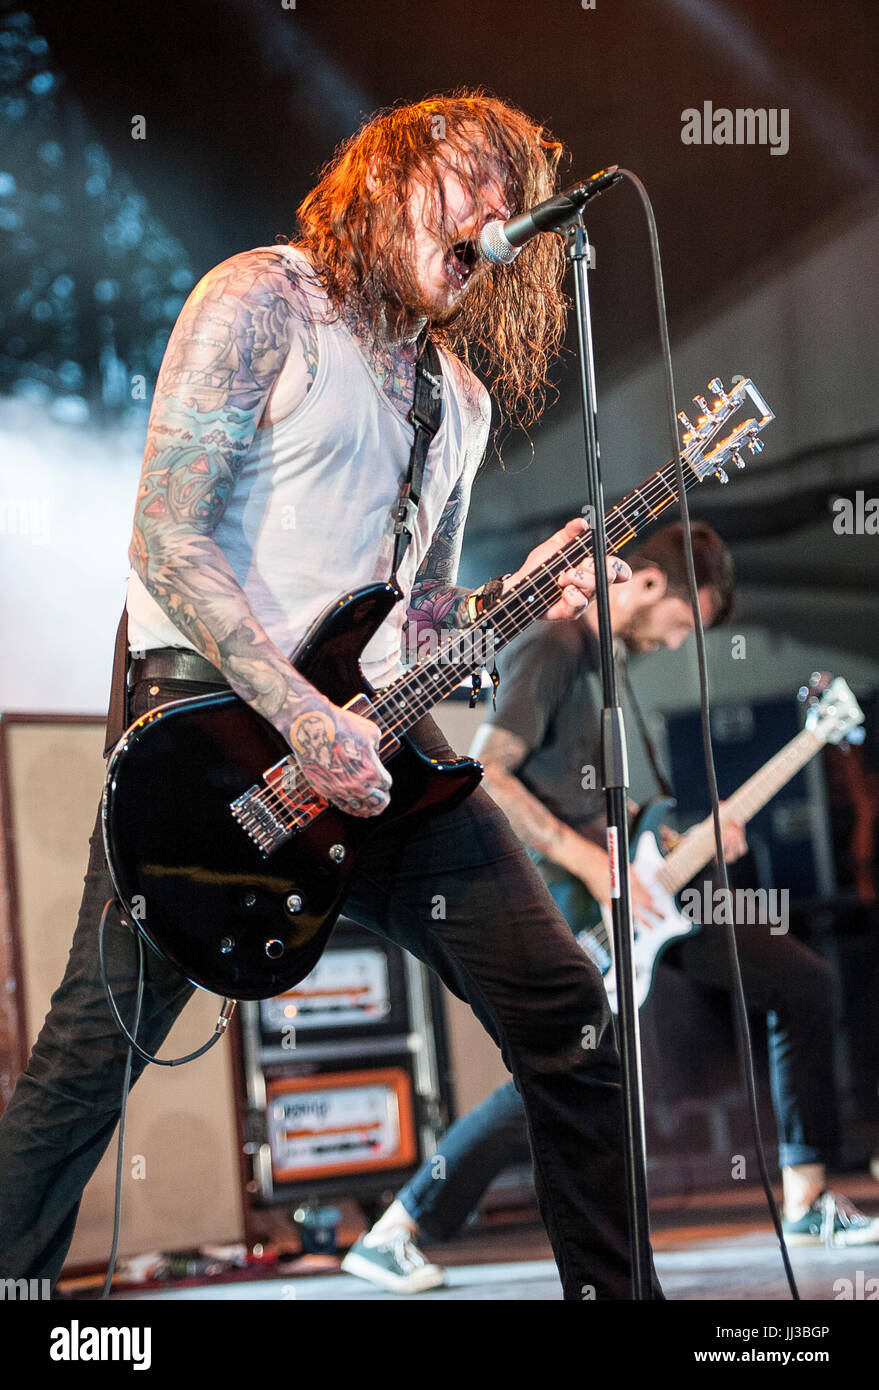 July 15, 2017 - Quebec City, Quebec; CAN - Singer MIKE HRANICA of the band THE  DEVIL WEARS PRADA performs live as part of the 2017 Festival D'ete De  Quebec that took